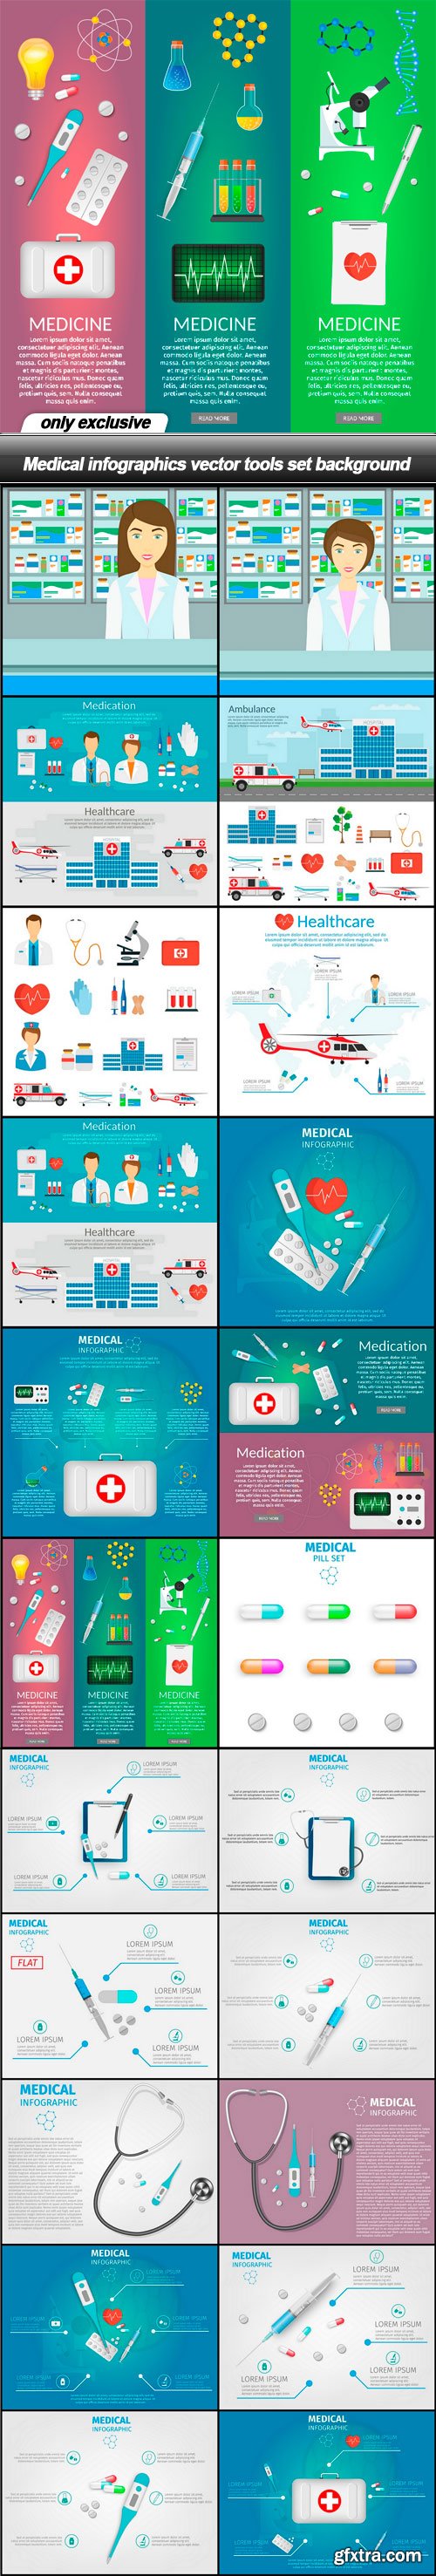 Medical infographics vector tools set background - 22 EPS